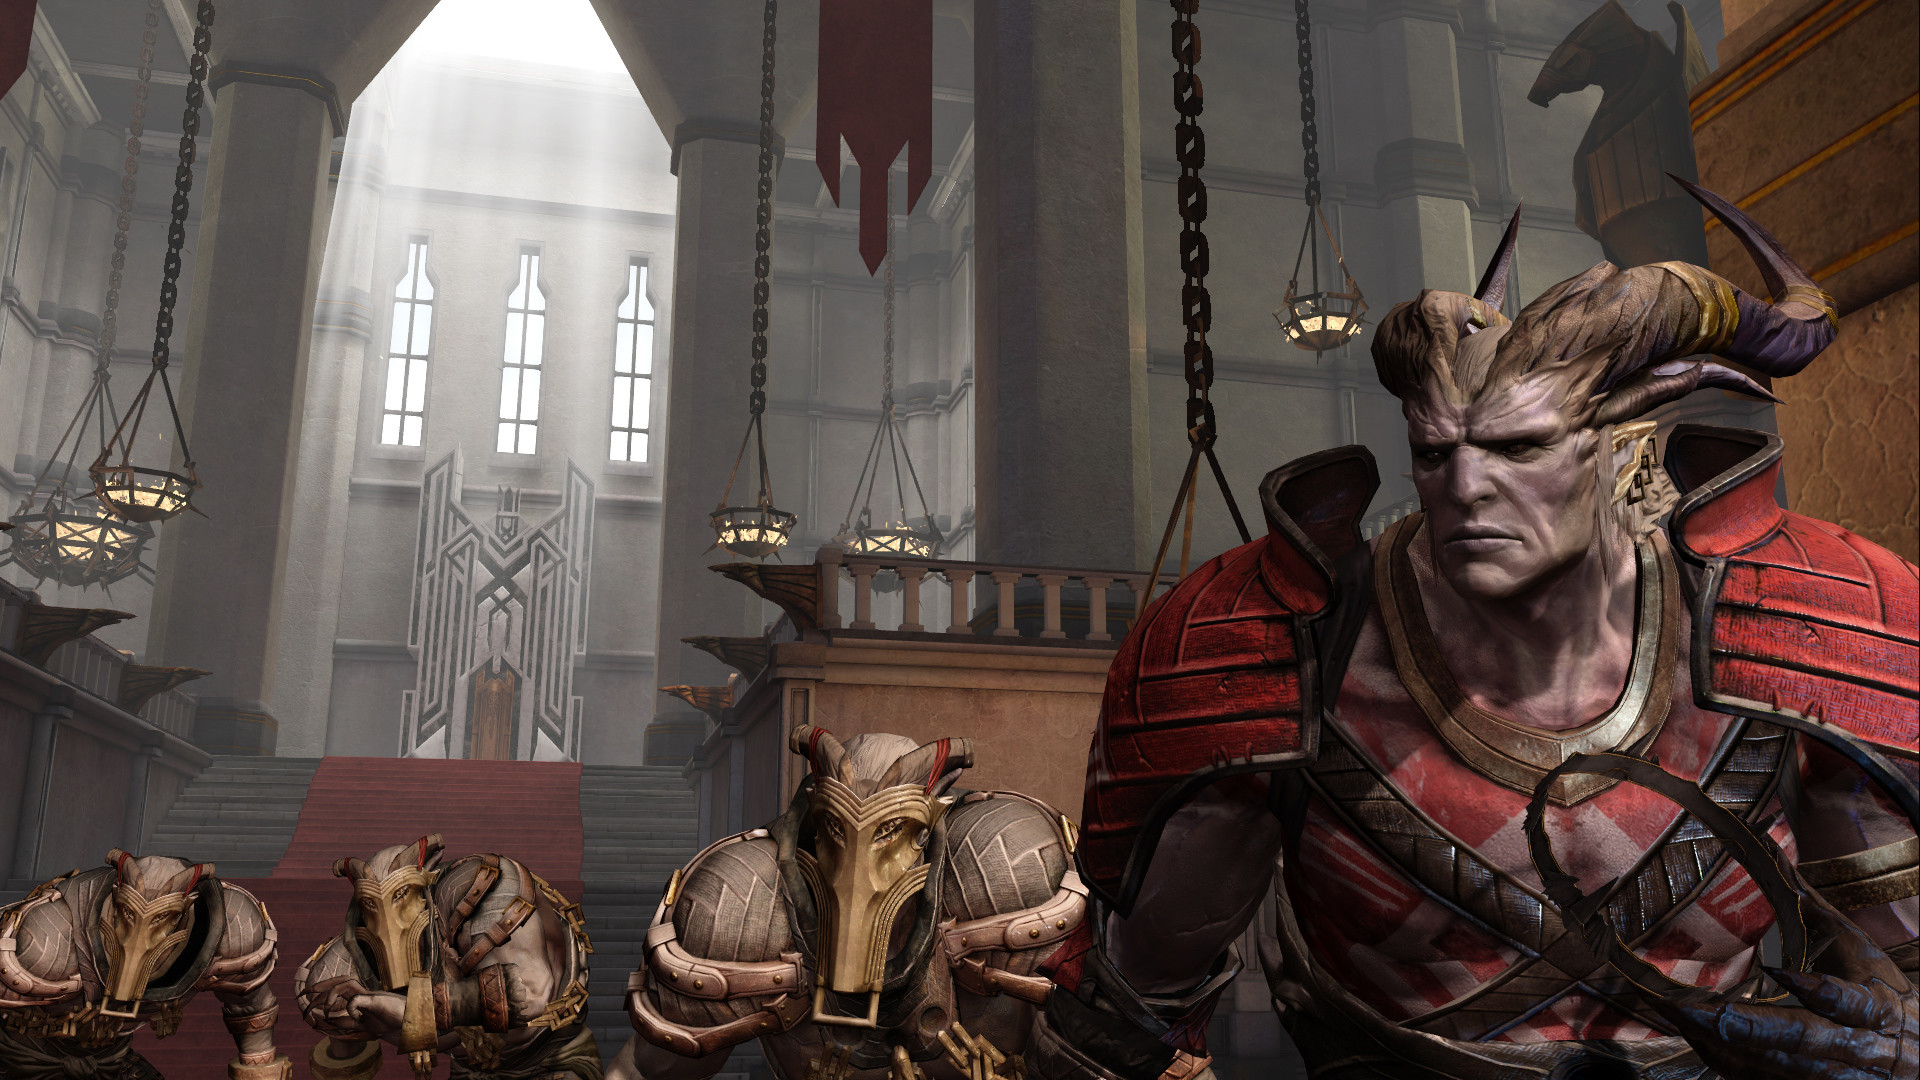 Dragon Age II: Ultimate Edition on Steam